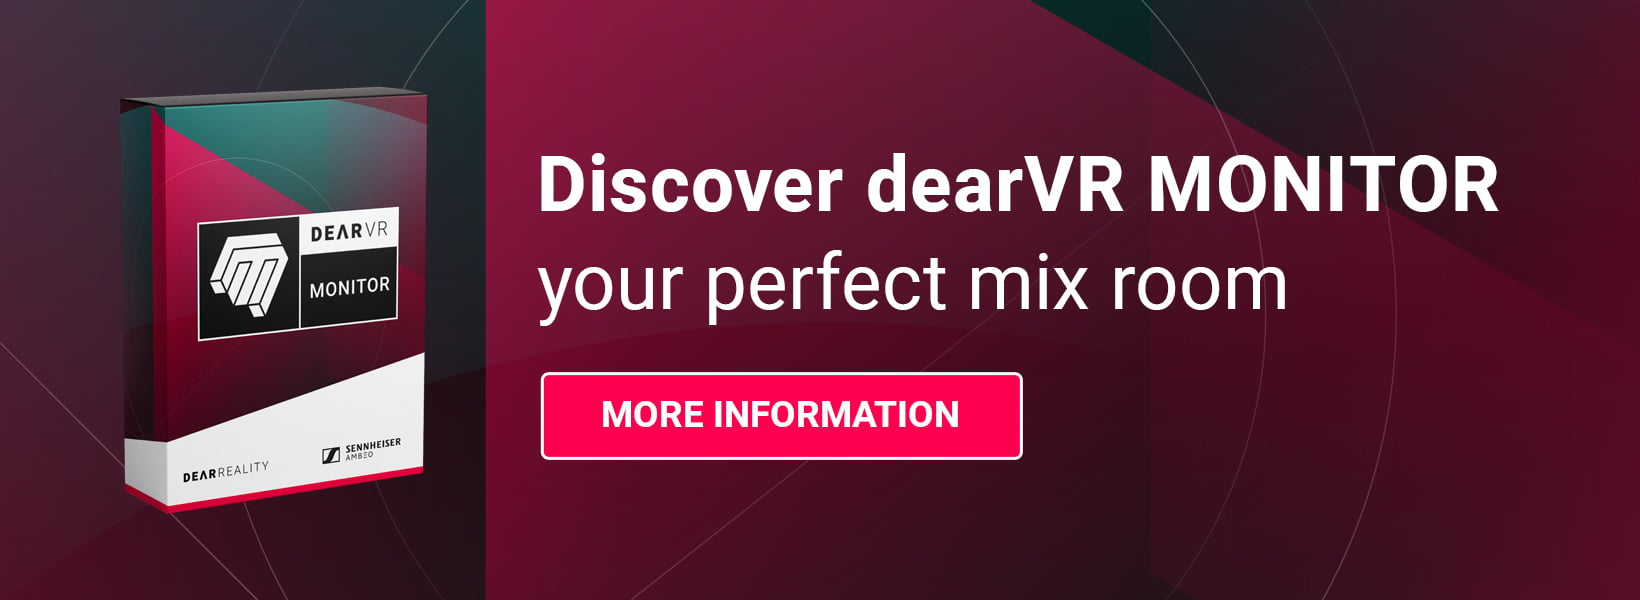 discover dearVR MONITOR - your perfect mix room